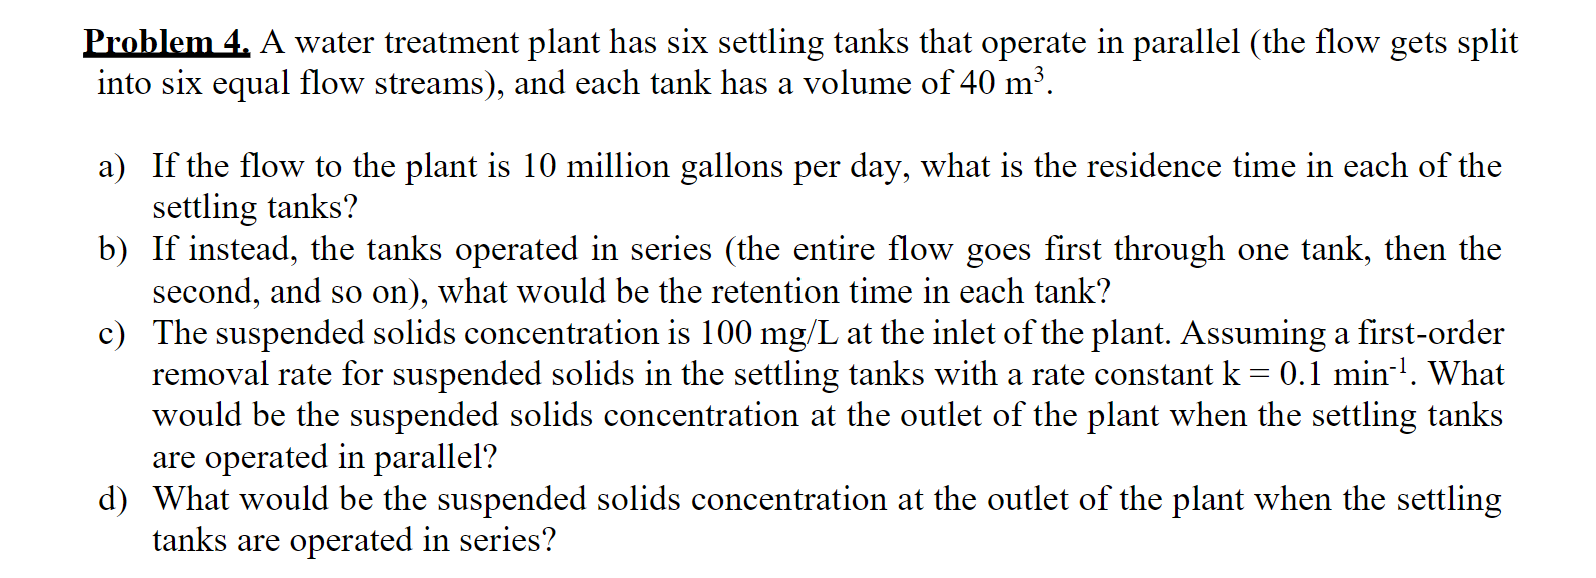 Problem 4. A water treatment plant has six settling tanks that operate in parallel (the flow gets split
into six equal flow streams), and each tank has a volume of 40 m³.
a) If the flow to the plant is 10 million gallons per day, what is the residence time in each of the
settling tanks?
b) If instead, the tanks operated in series (the entire flow goes first through one tank, then the
second, and so on), what would be the retention time in each tank?
c) The suspended solids concentration is 100 mg/L at the inlet of the plant. Assuming a first-order
removal rate for suspended solids in the settling tanks with a rate constant k = 0.1 min-'. What
would be the suspended solids concentration at the outlet of the plant when the settling tanks
are operated in parallel?
d) What would be the suspended solids concentration at the outlet of the plant when the settling
tanks are operated in series?
